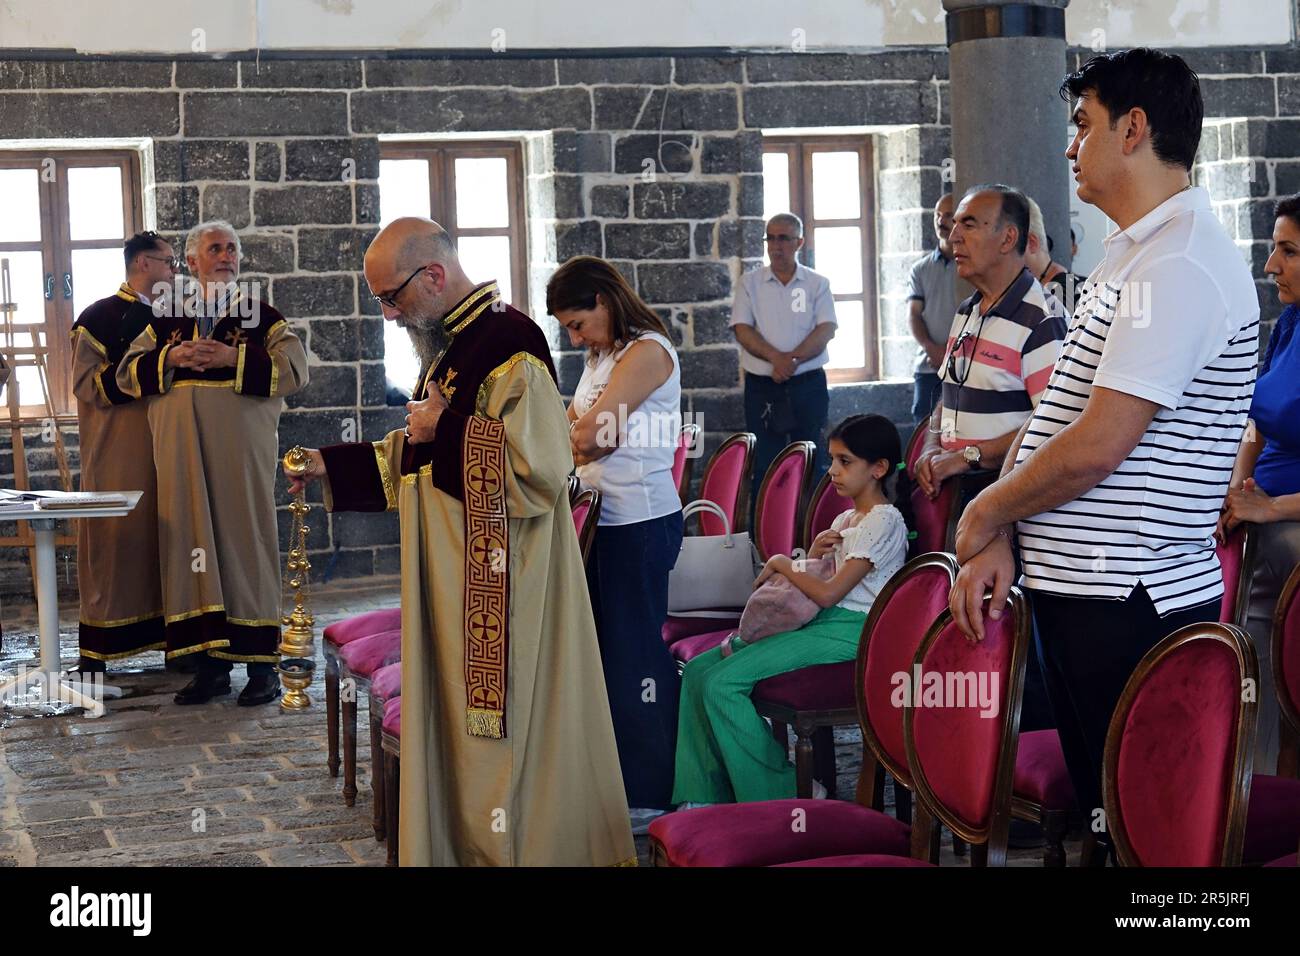 People attend the ritual at Diyarbak?r Surp Hovsep Church. At the Surp Hovsep Armenian Catholic Church, which was heavily damaged in clashes between armed Kurdish PKK militants and Turkish security forces in the center of Diyarbakir in 2015 and repaired as a result of a 4-year restoration, the second ritual in the last 100 years after the first ritual in 2021. Very few Armenians who came from Istanbul and lived in Diyarbakir attended the ceremony. The ritual was led by Senior Priest Abraham Firat and Subordinate Deacon Jan Acemoglu, who were ordained from Istanbul. The church is used today as Stock Photo